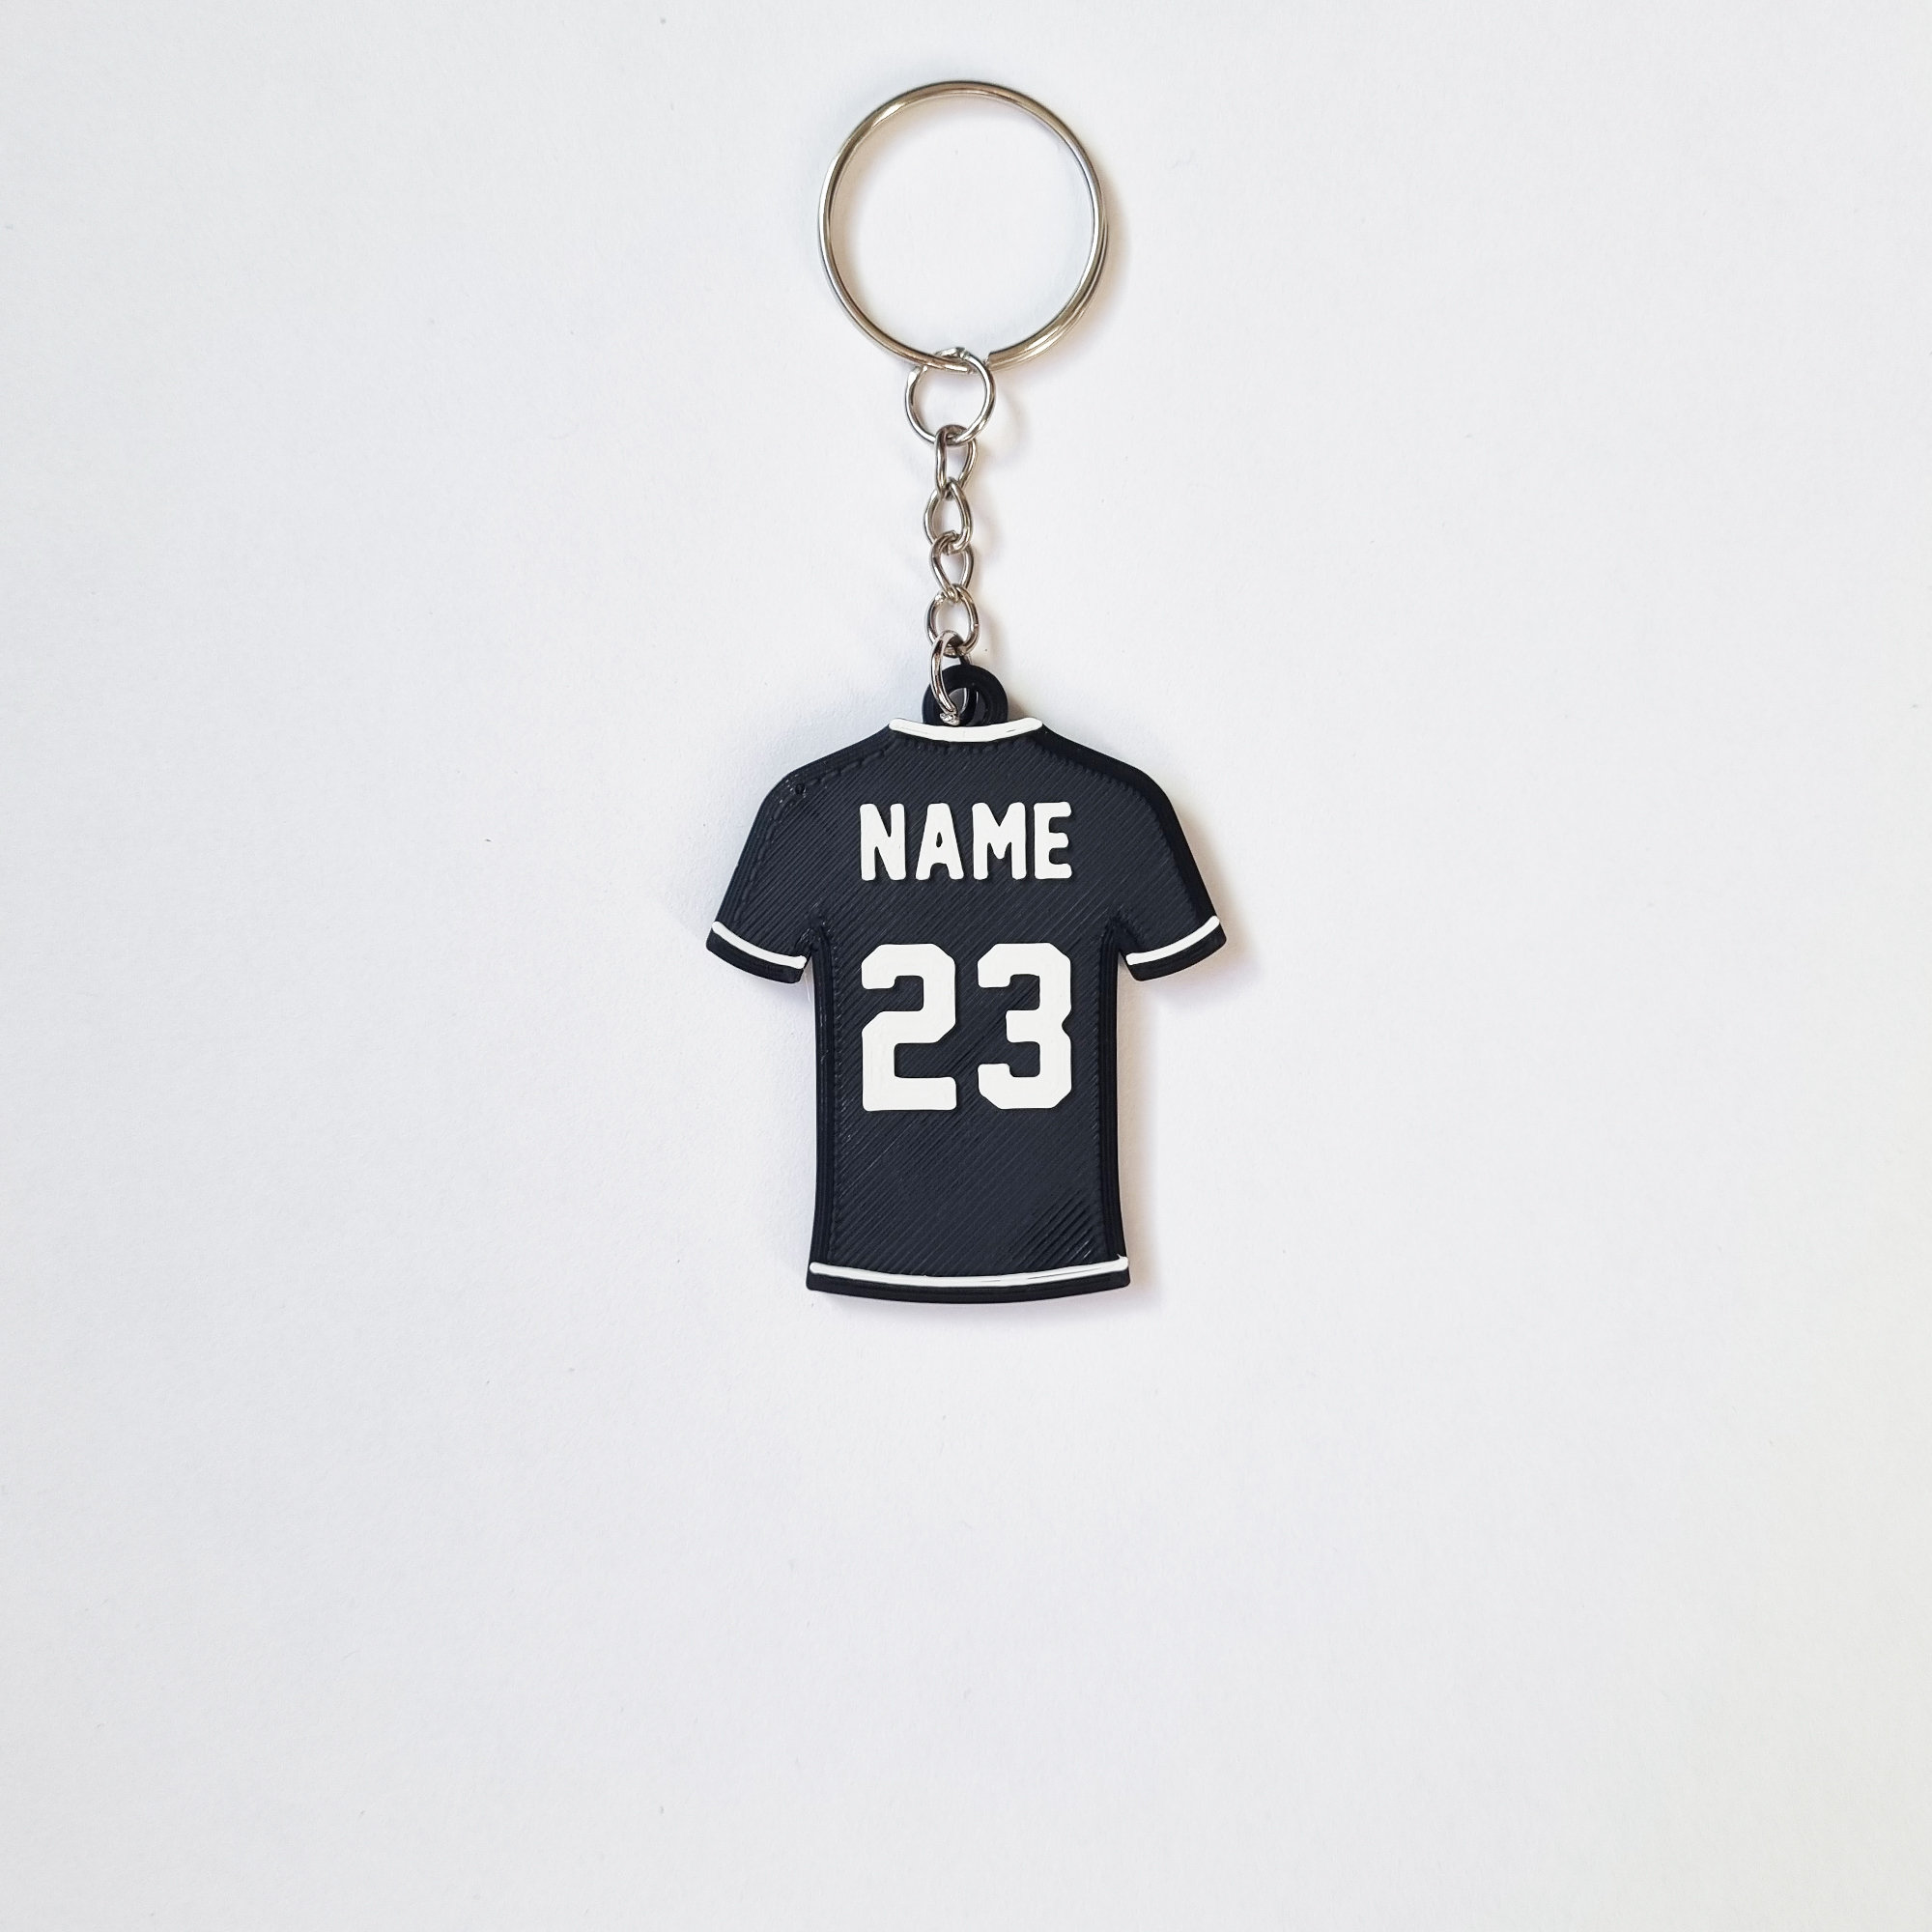 JERSEY KEYCHAIN SCRUB Top Keychains Sublimation Blanks Sublimation